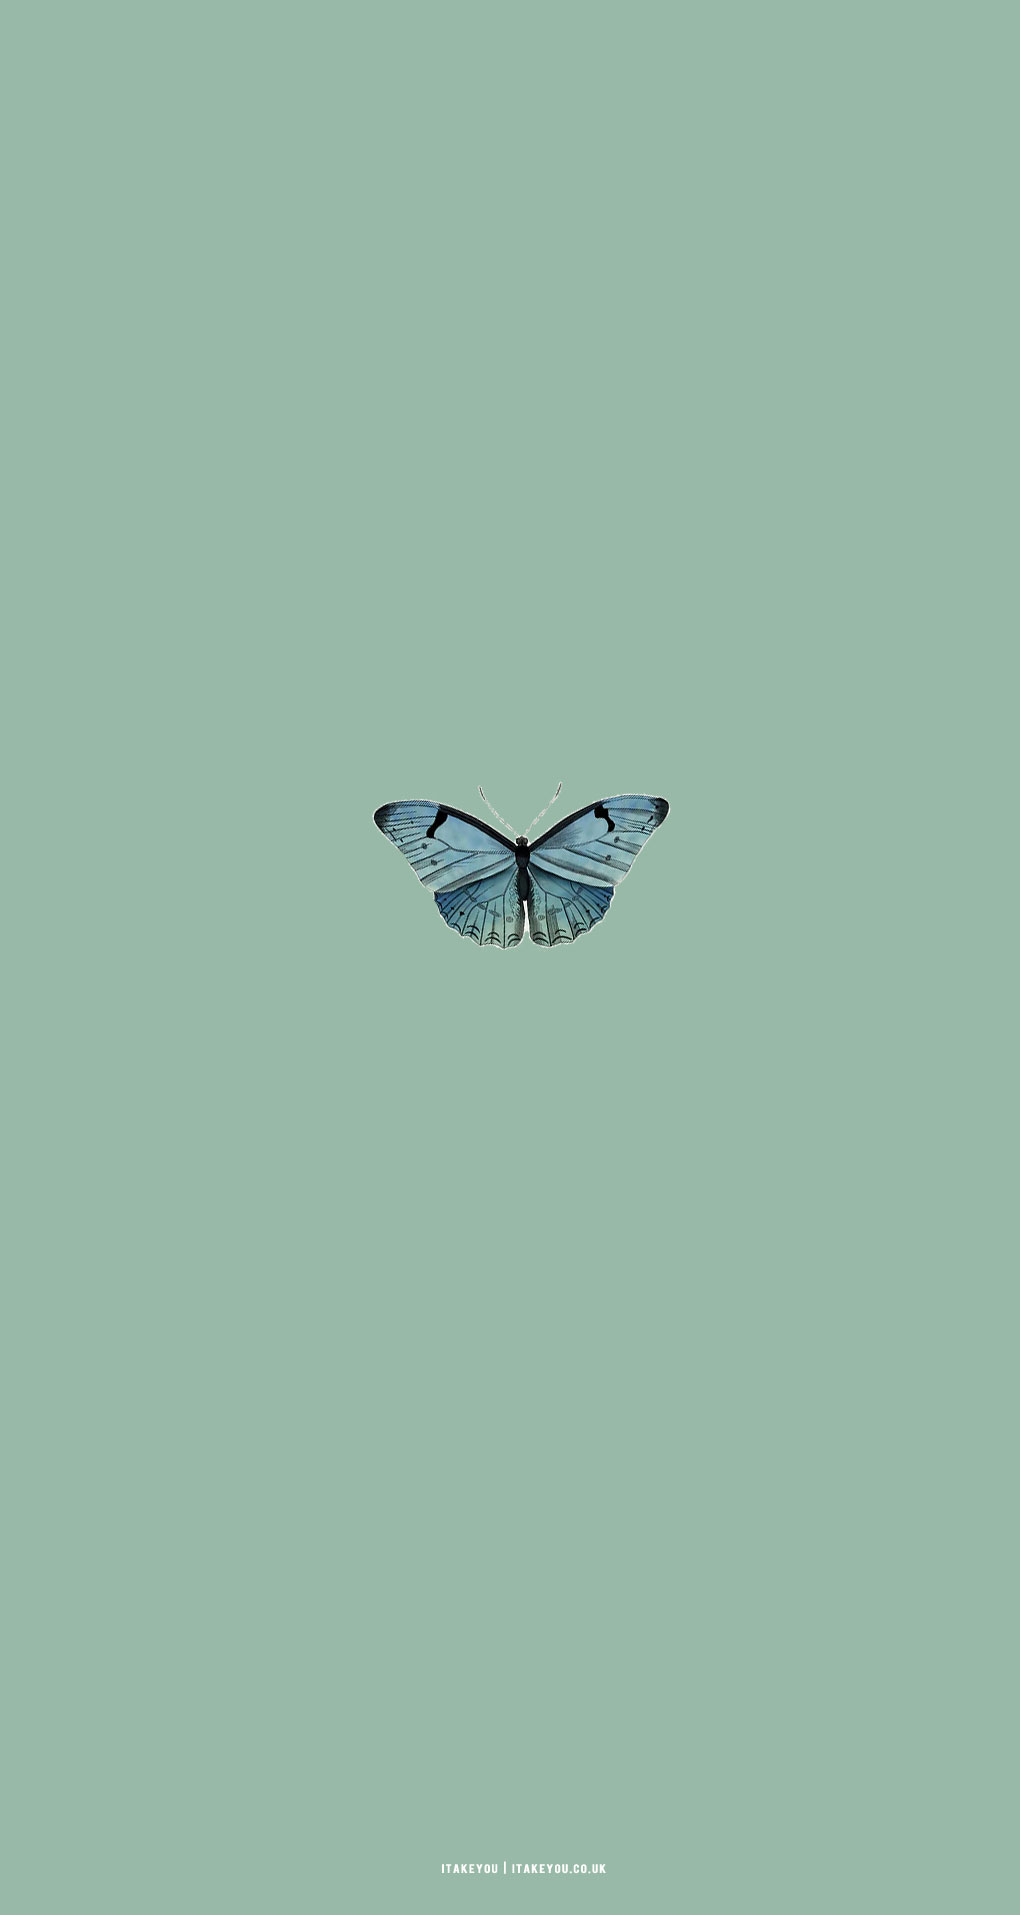 Sage Green Minimalist Wallpaper for Phone, A Butterfly I Take You. Wedding Readings. Wedding Ideas